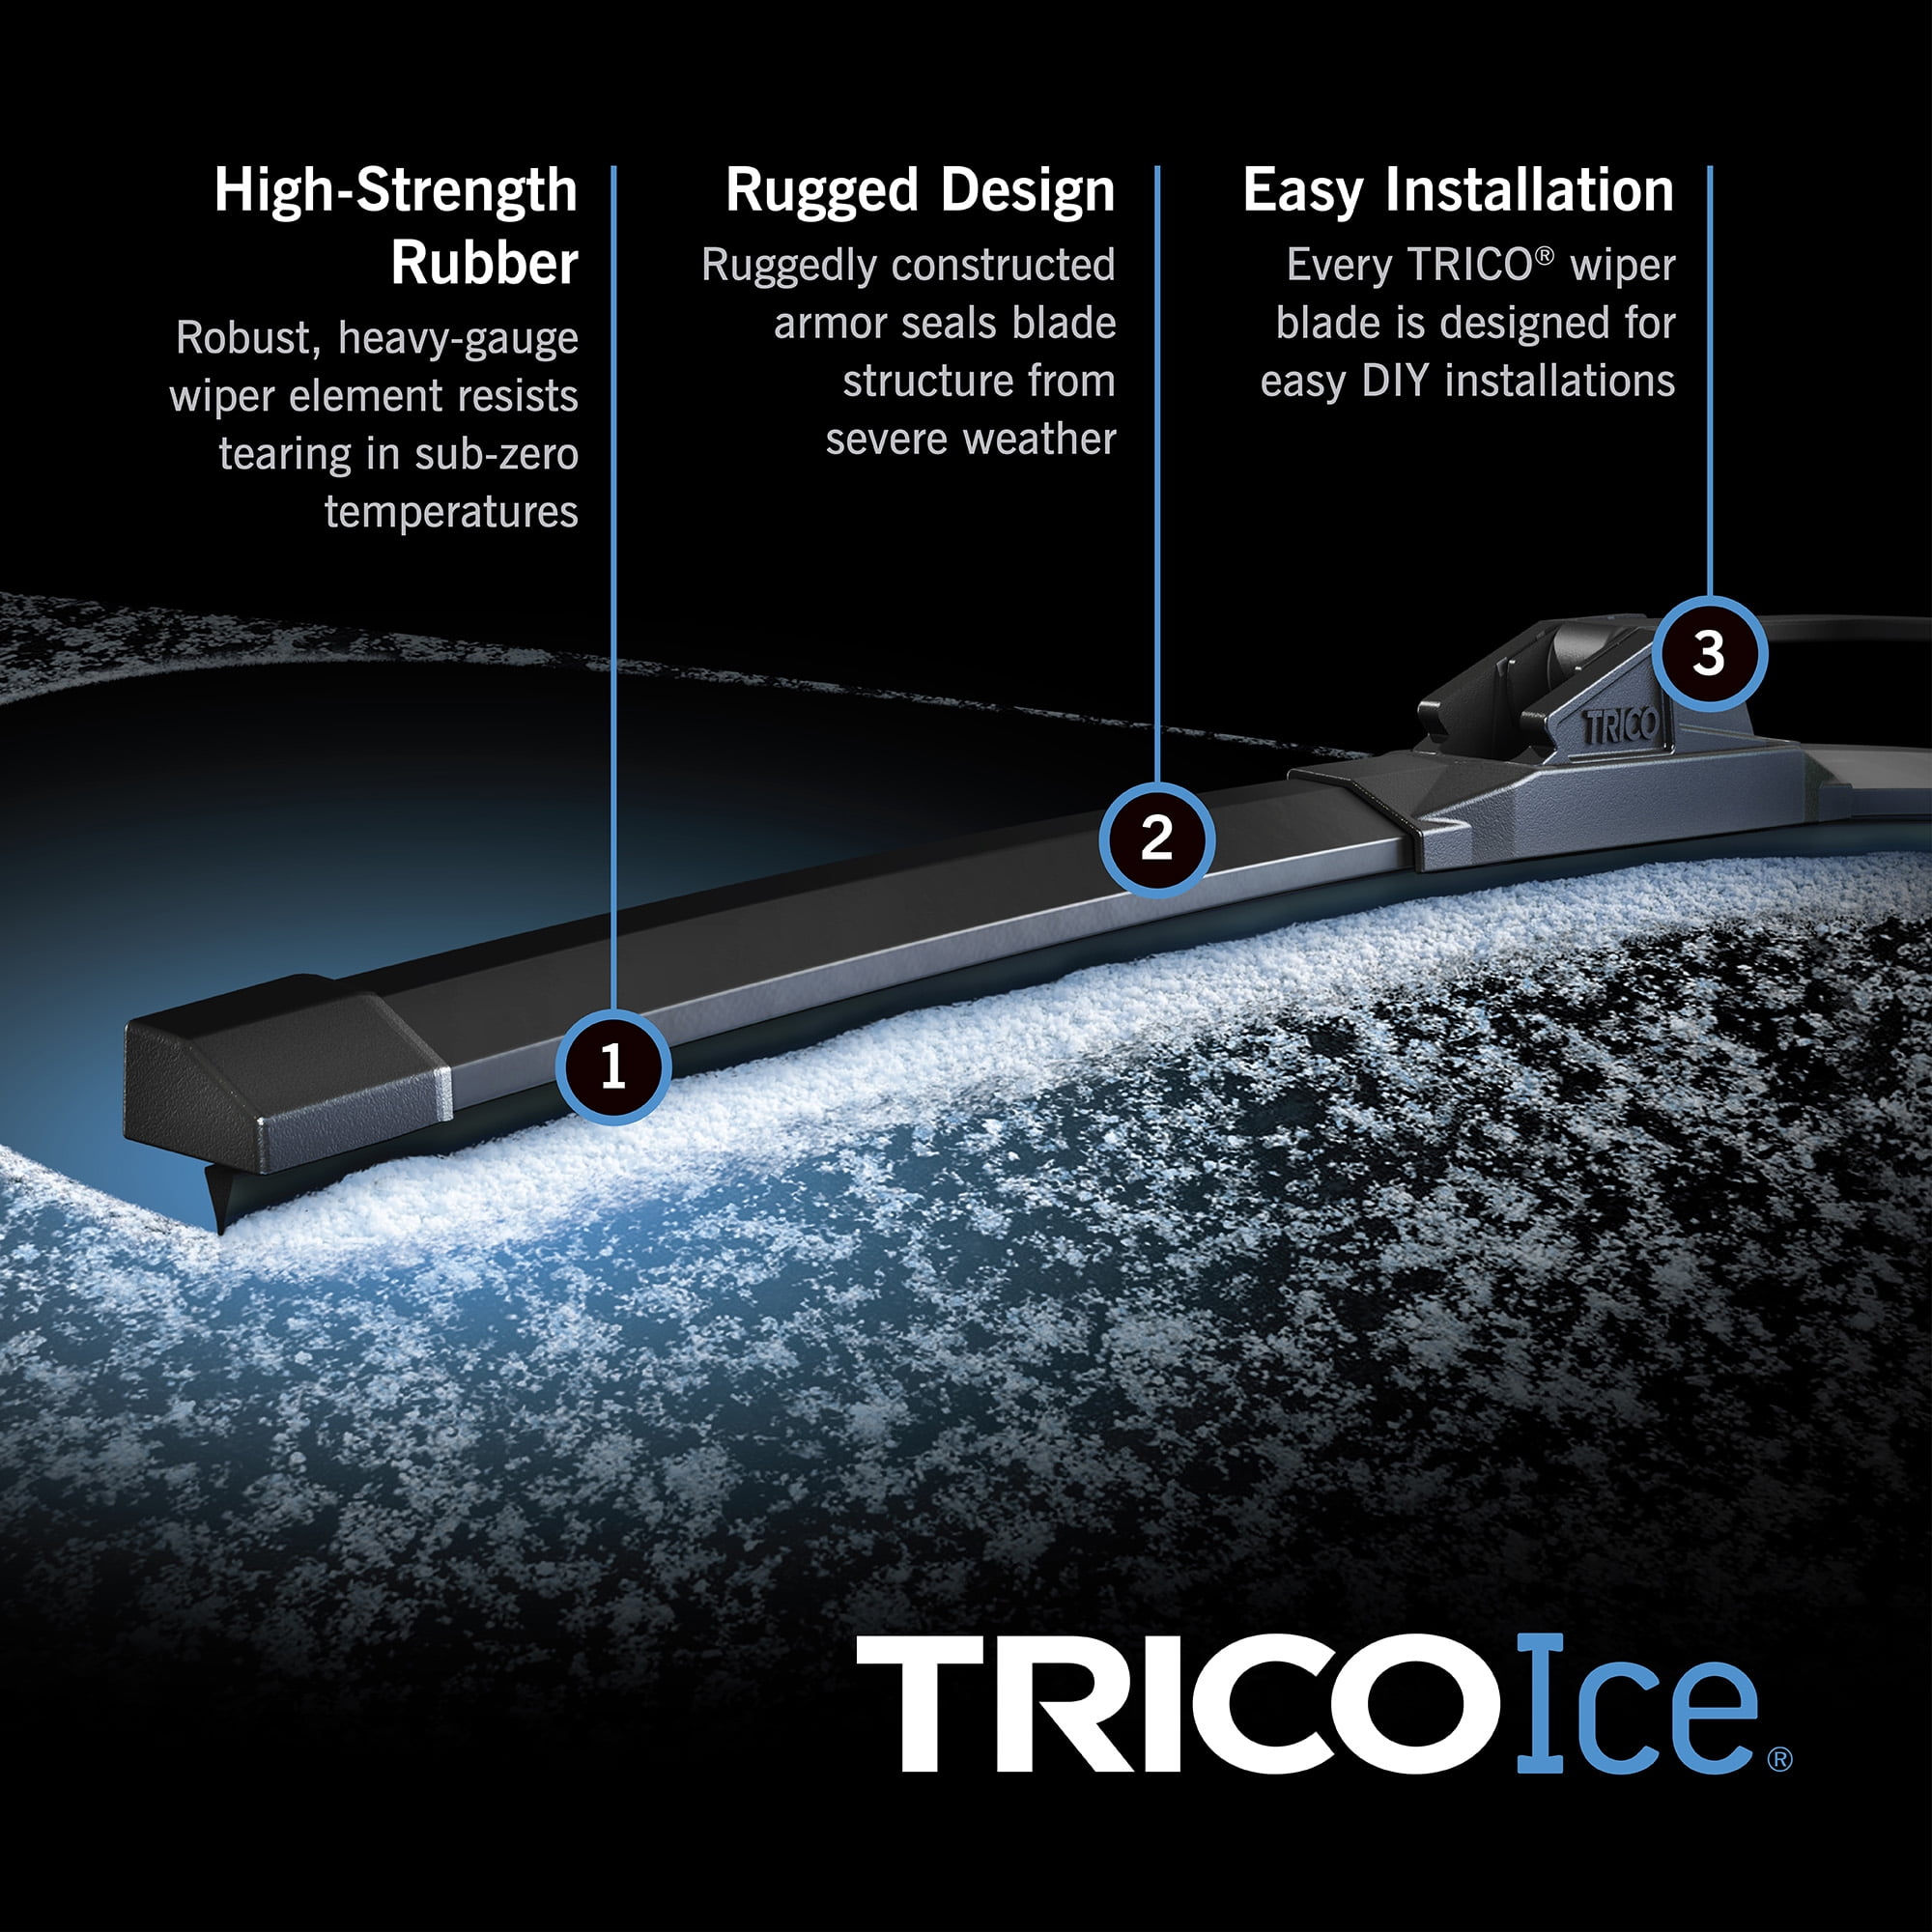 TRICO 35-200 Beam Blade Winter Wipers for Snow & Ice fit Nearly Any Wiper Arm Attachment Bulk WINTER Wiper Blades for Fleets & Service Repair Shops 20 5-Wiper Factory Master Case 